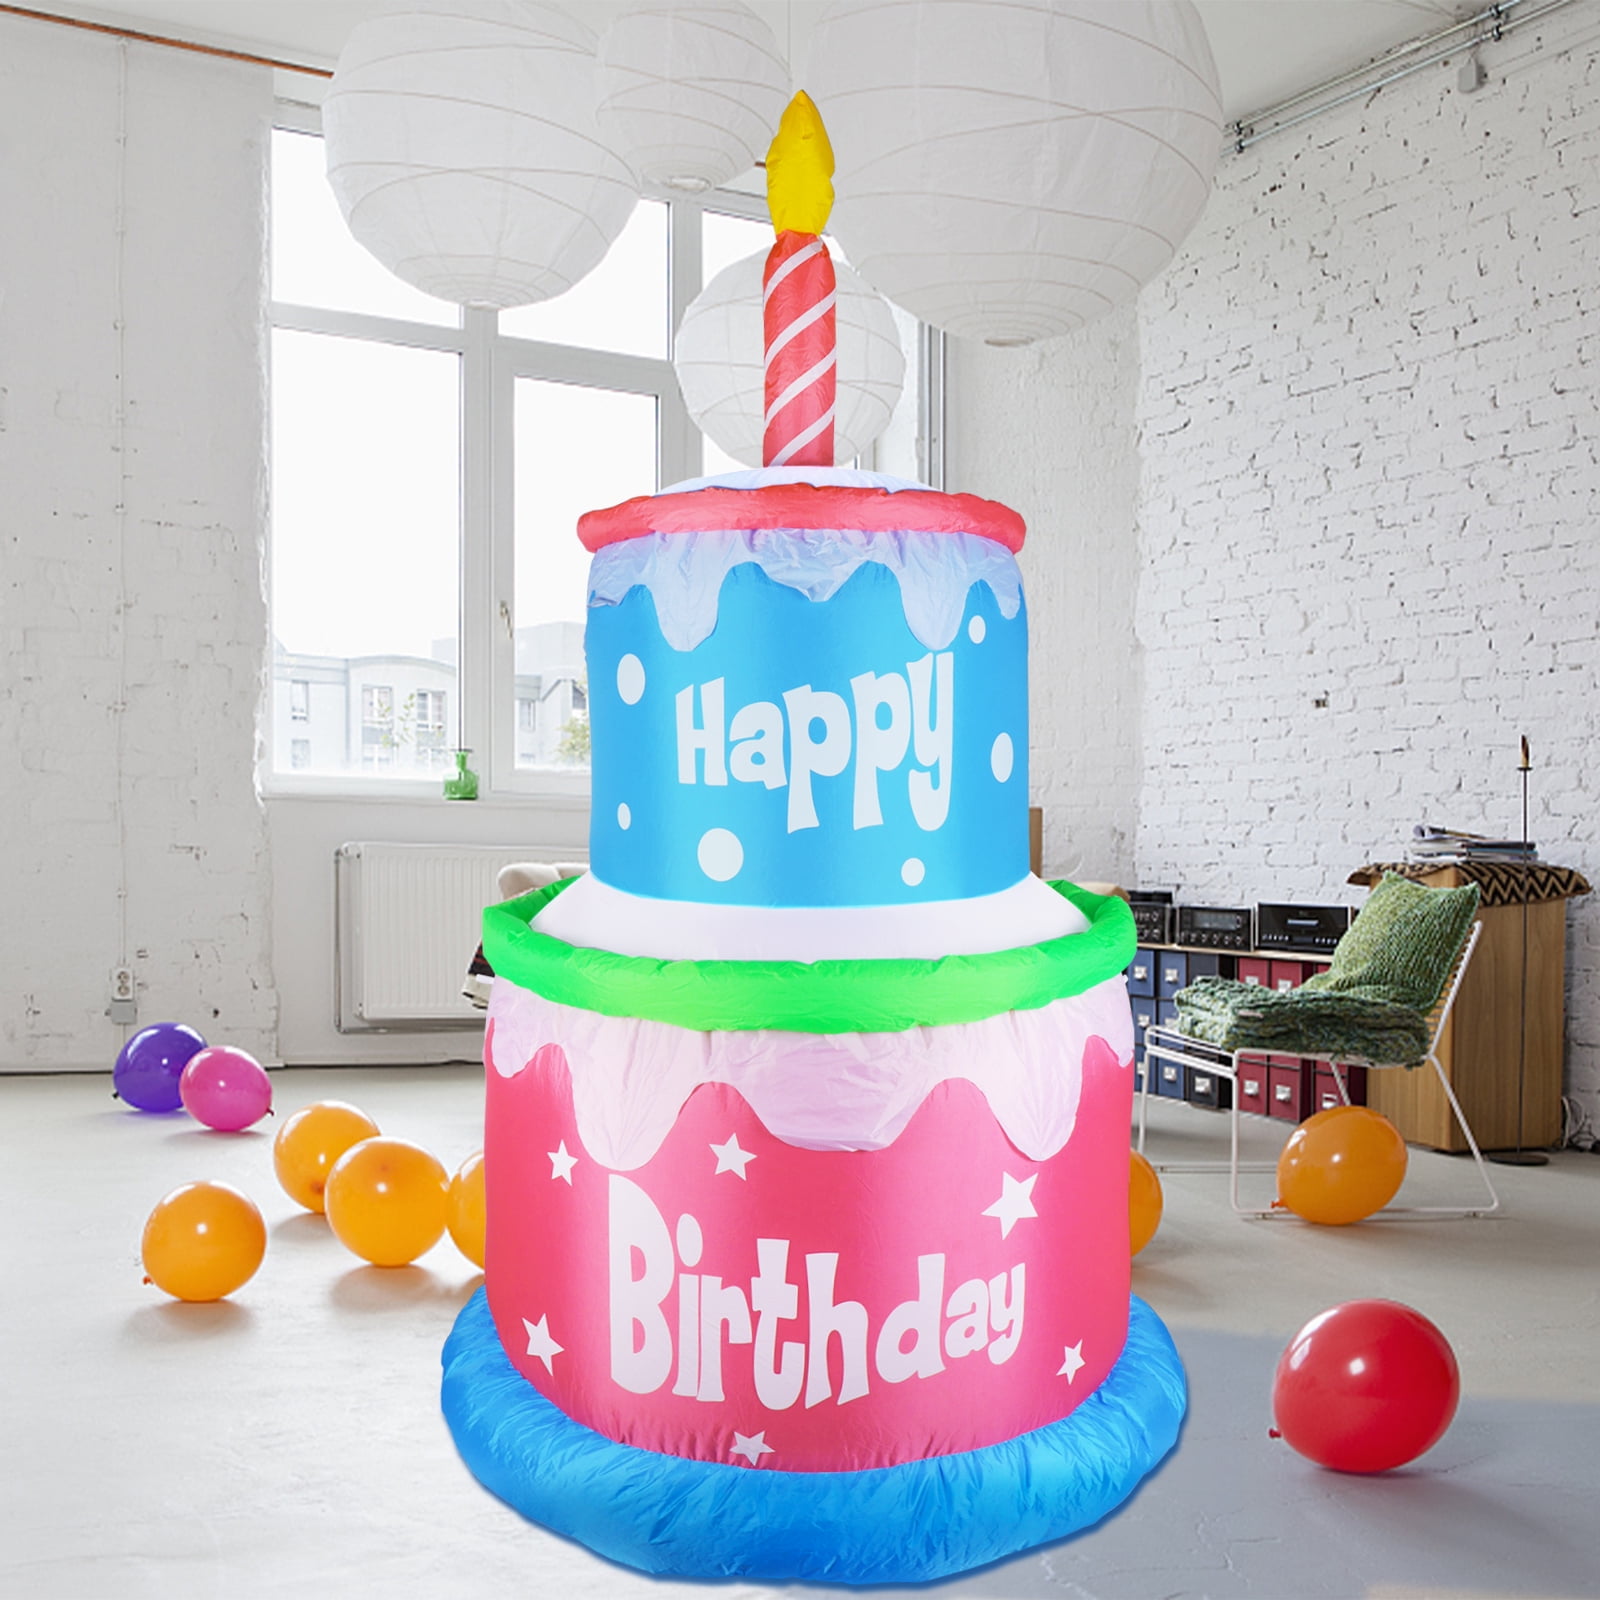 GOOSH 5.5FT Birthday Inflatables Outdoor Decorations Cake with Candle，Happy Birthday  Blow Up Yard Decorations with Colorful Rotating LED Lights for Party Yard  Garden Lawn (Blue-B) - Walmart.com